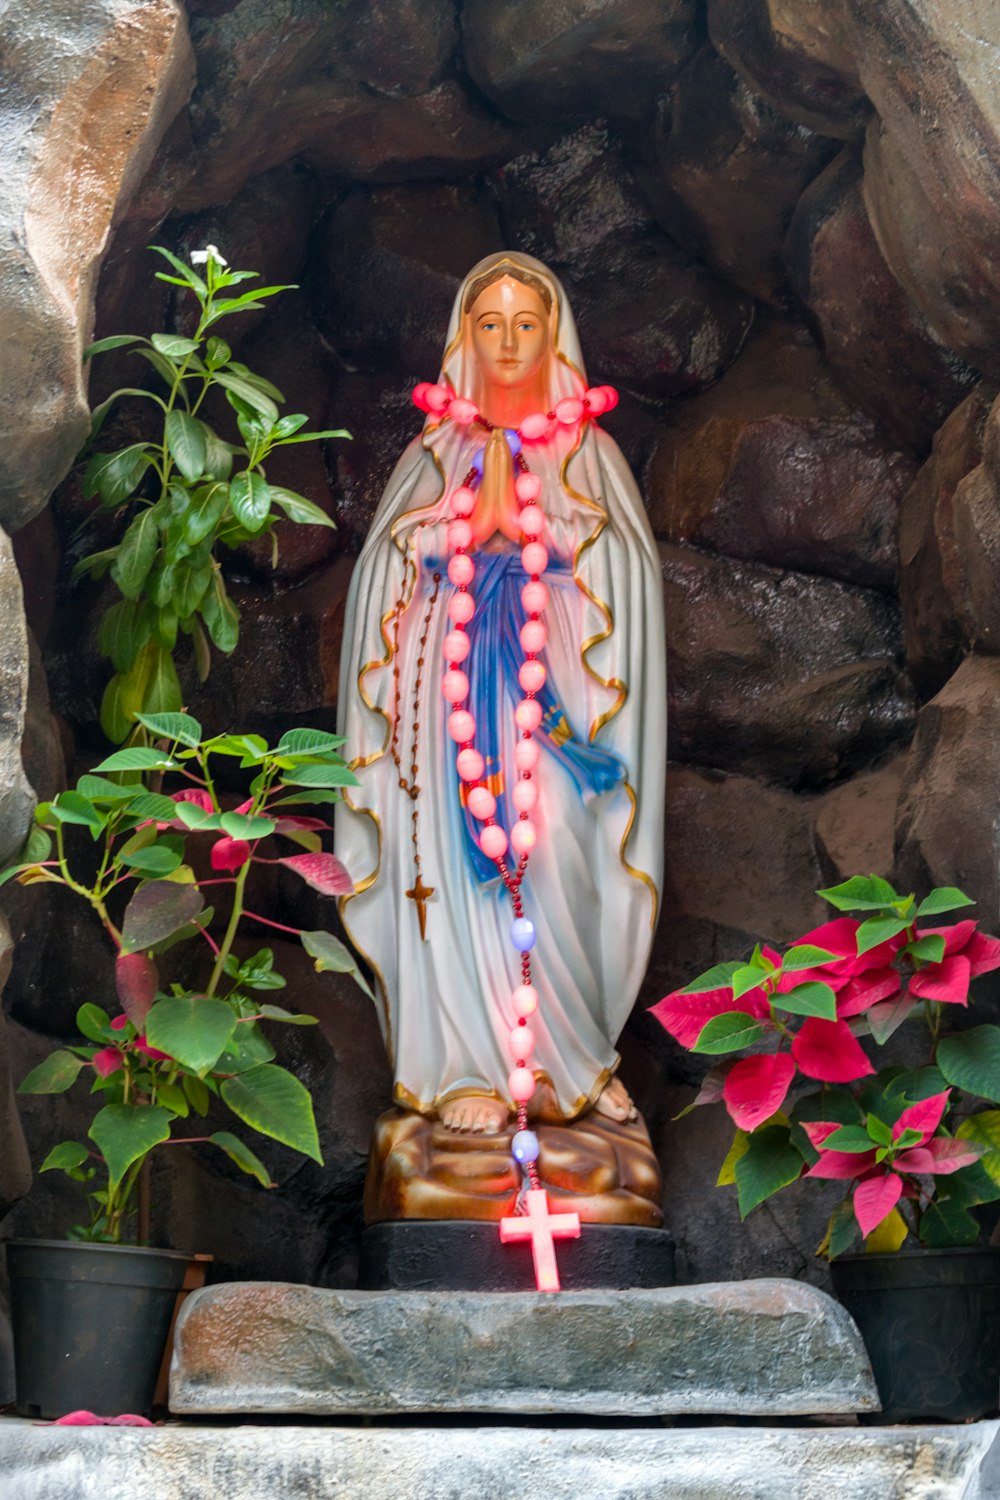 a statue of the virgin mary surrounded by flowers